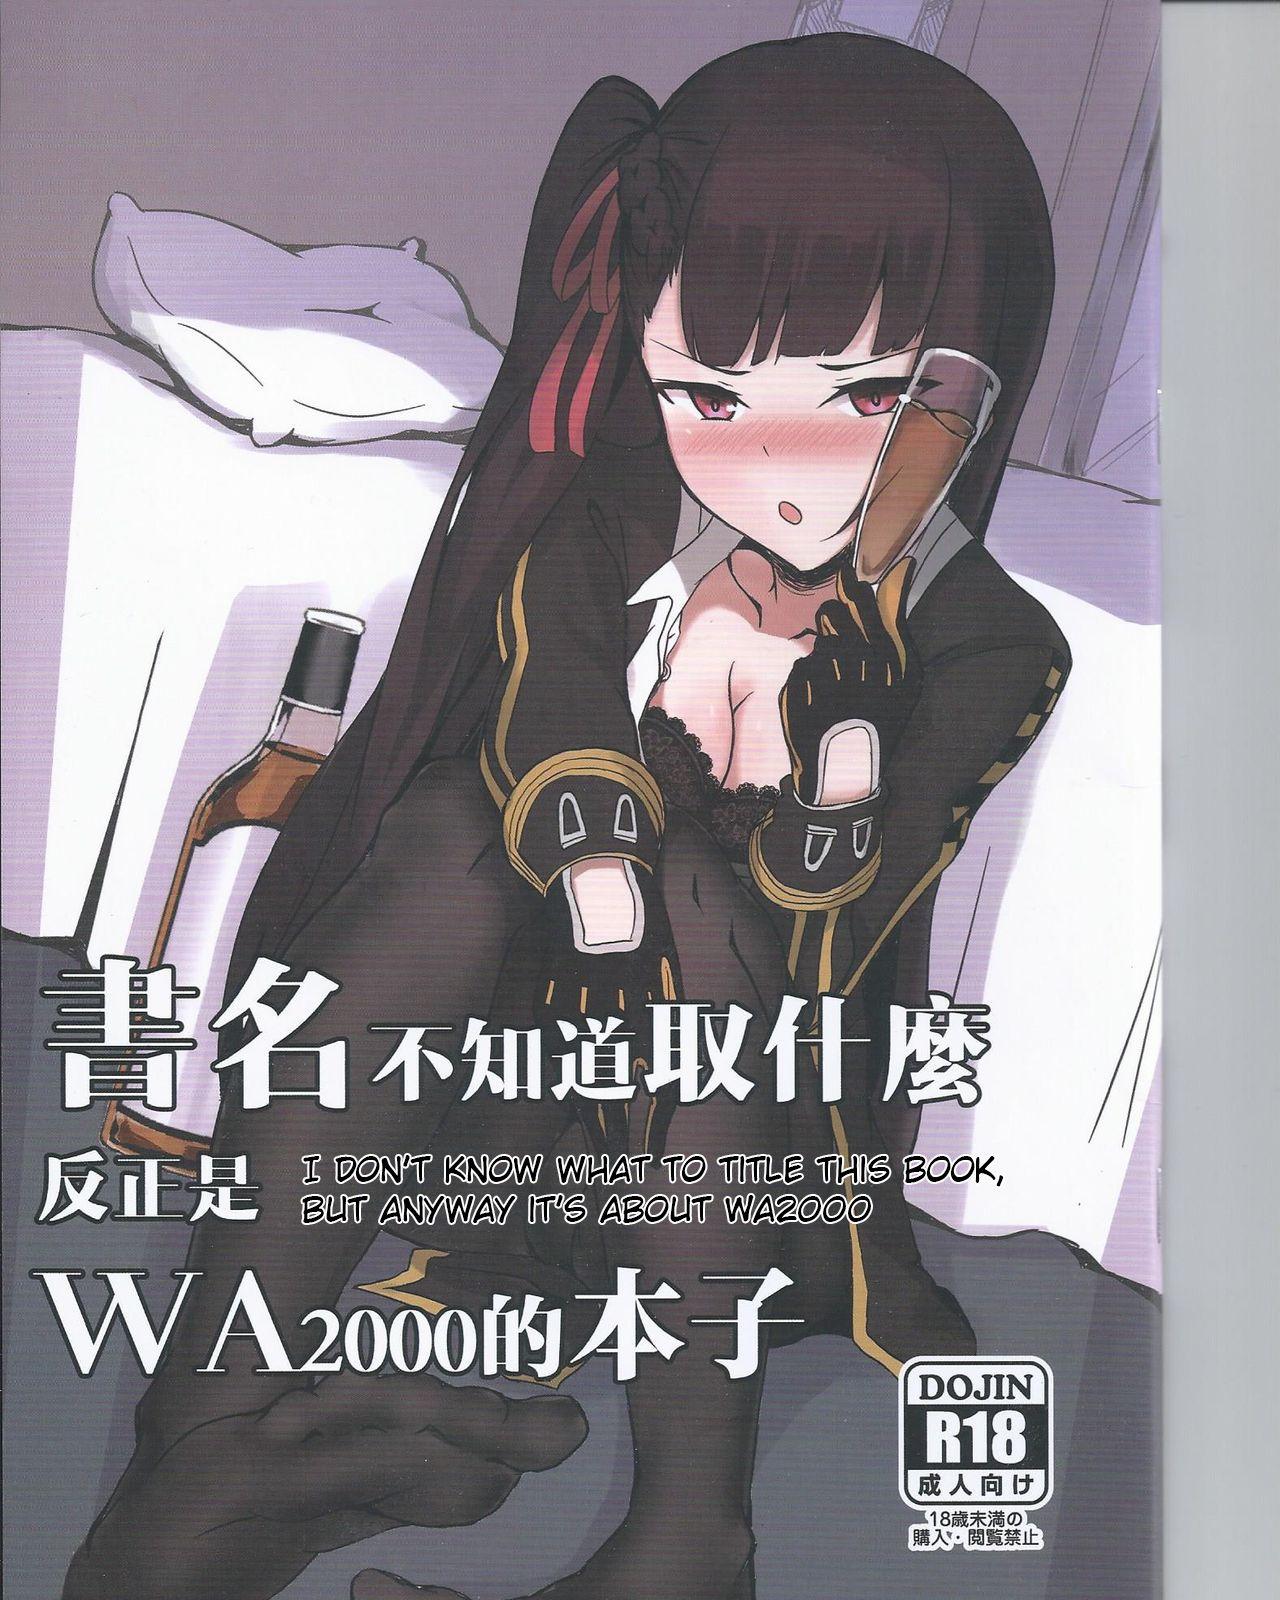 I don't know what to title this book, but anyway it's about WA2000 0